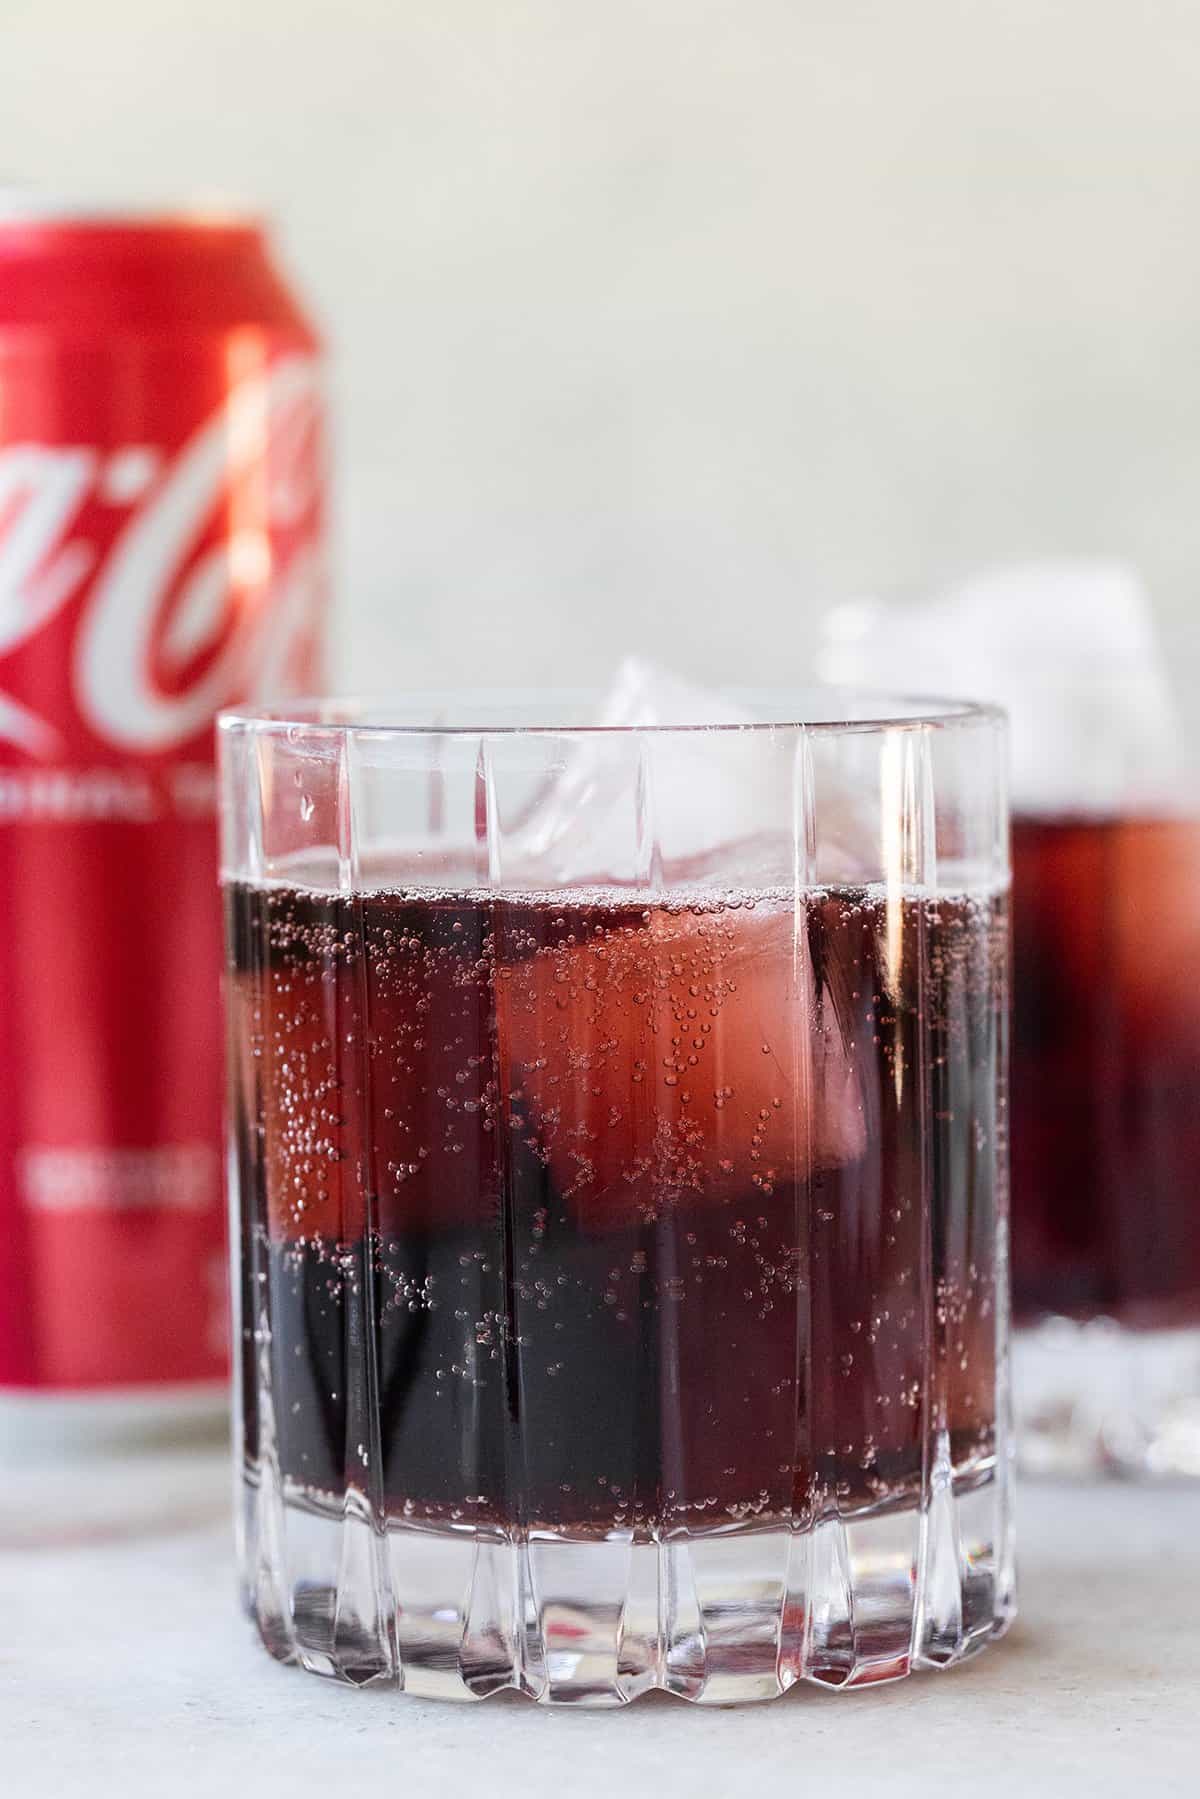  Kalimotxo in a glass with ice.